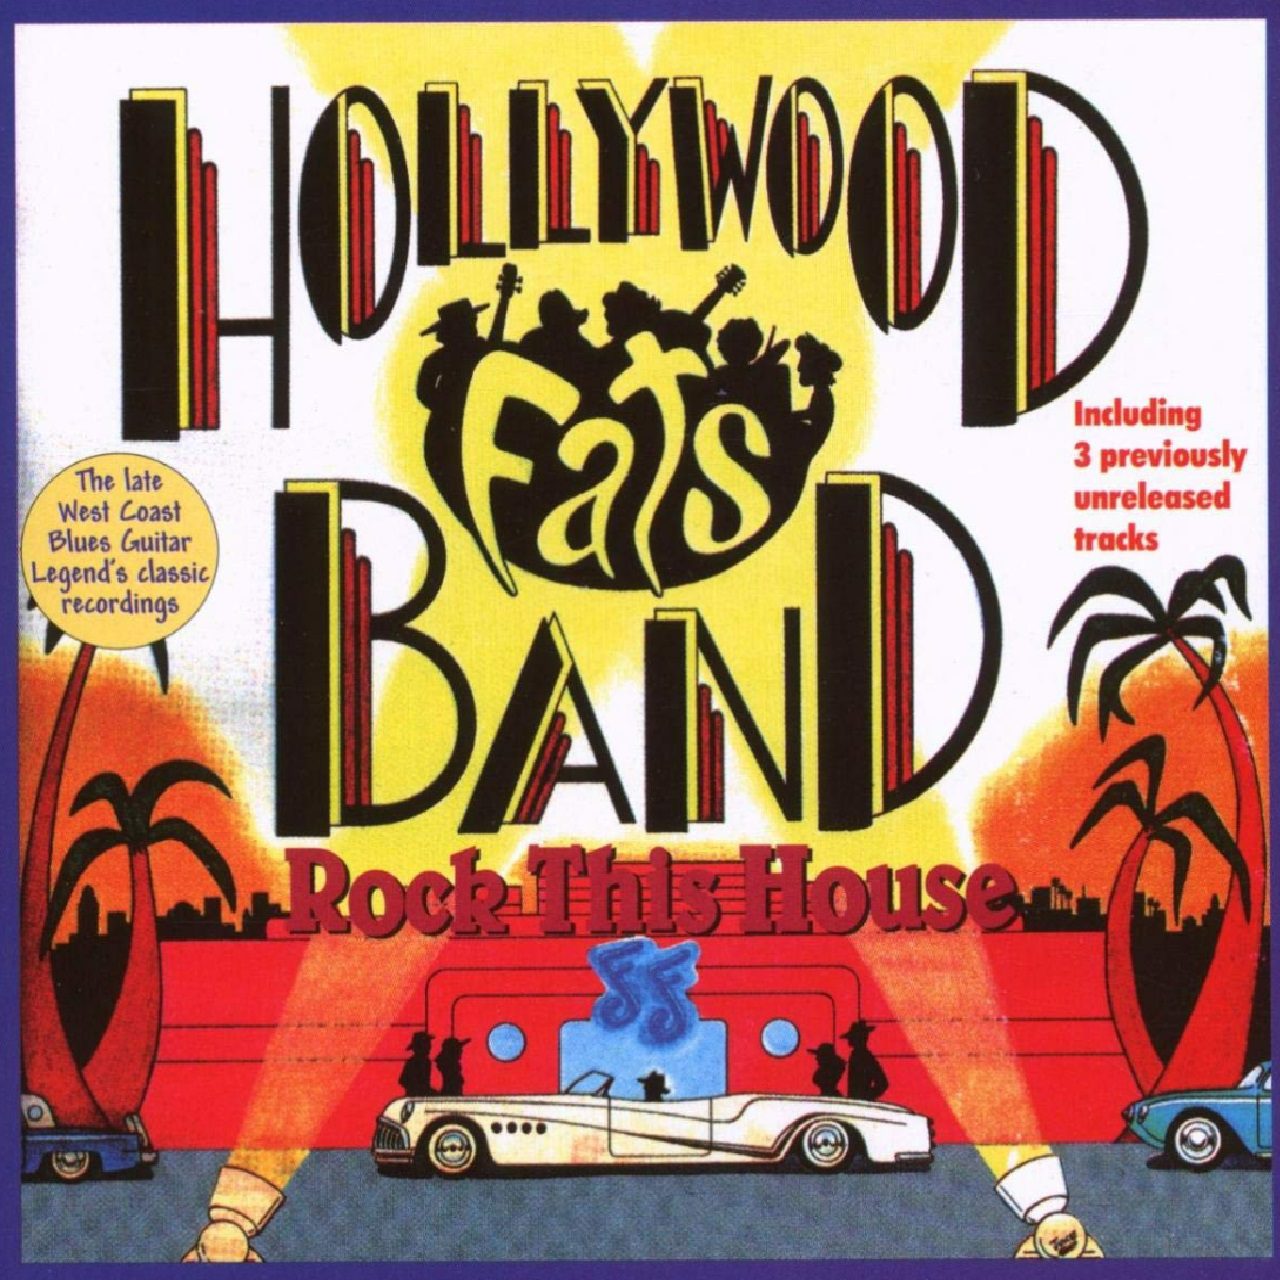 Hollywood Fats – Rock This House cover album